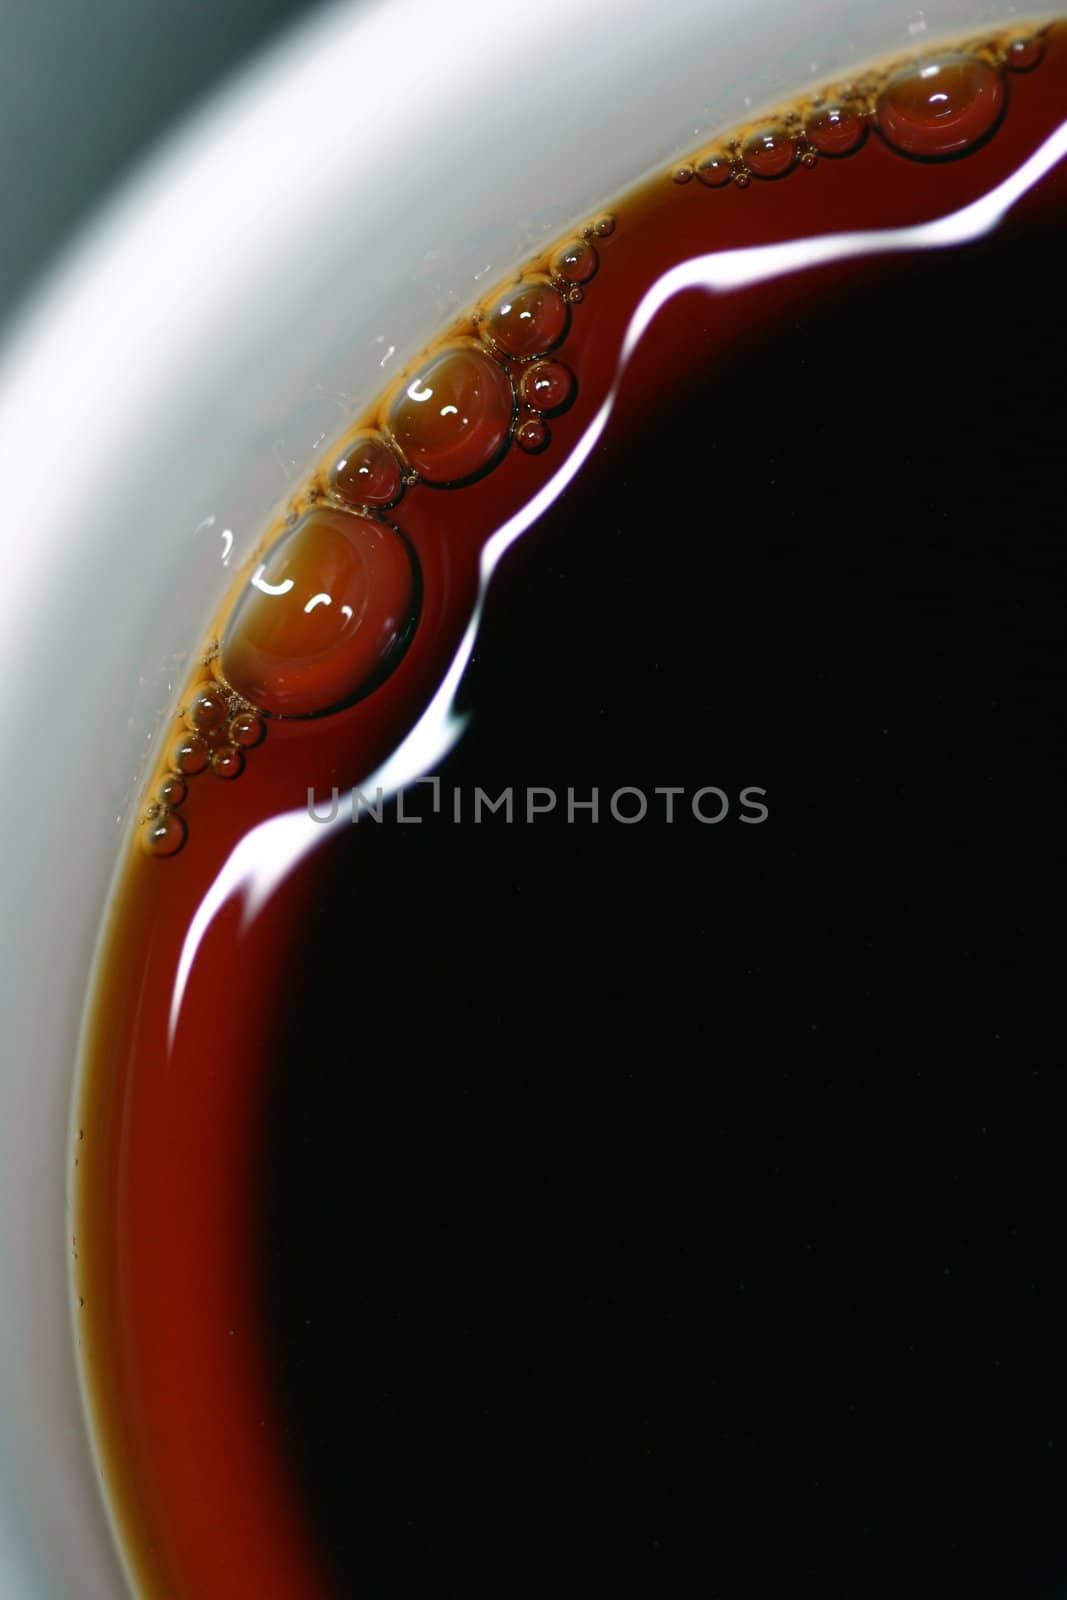 Extreme close-up of coffee with beautiful highlights and bubbles- could also be used as an image of tea